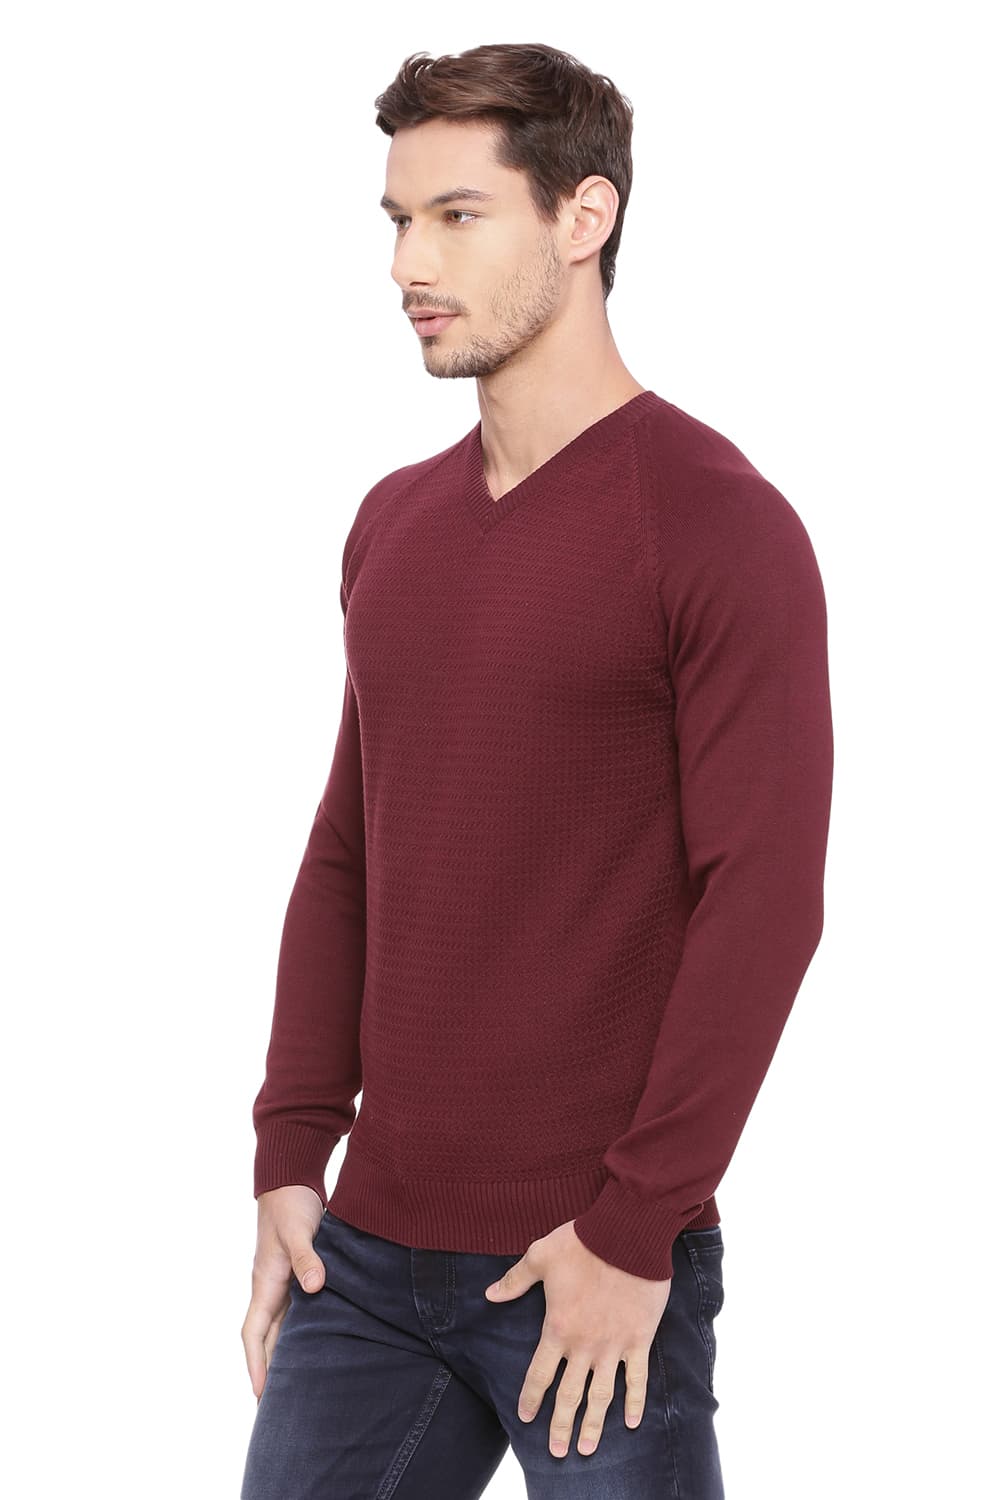 BASICS MUSCLE FIT V NECK SWEATER